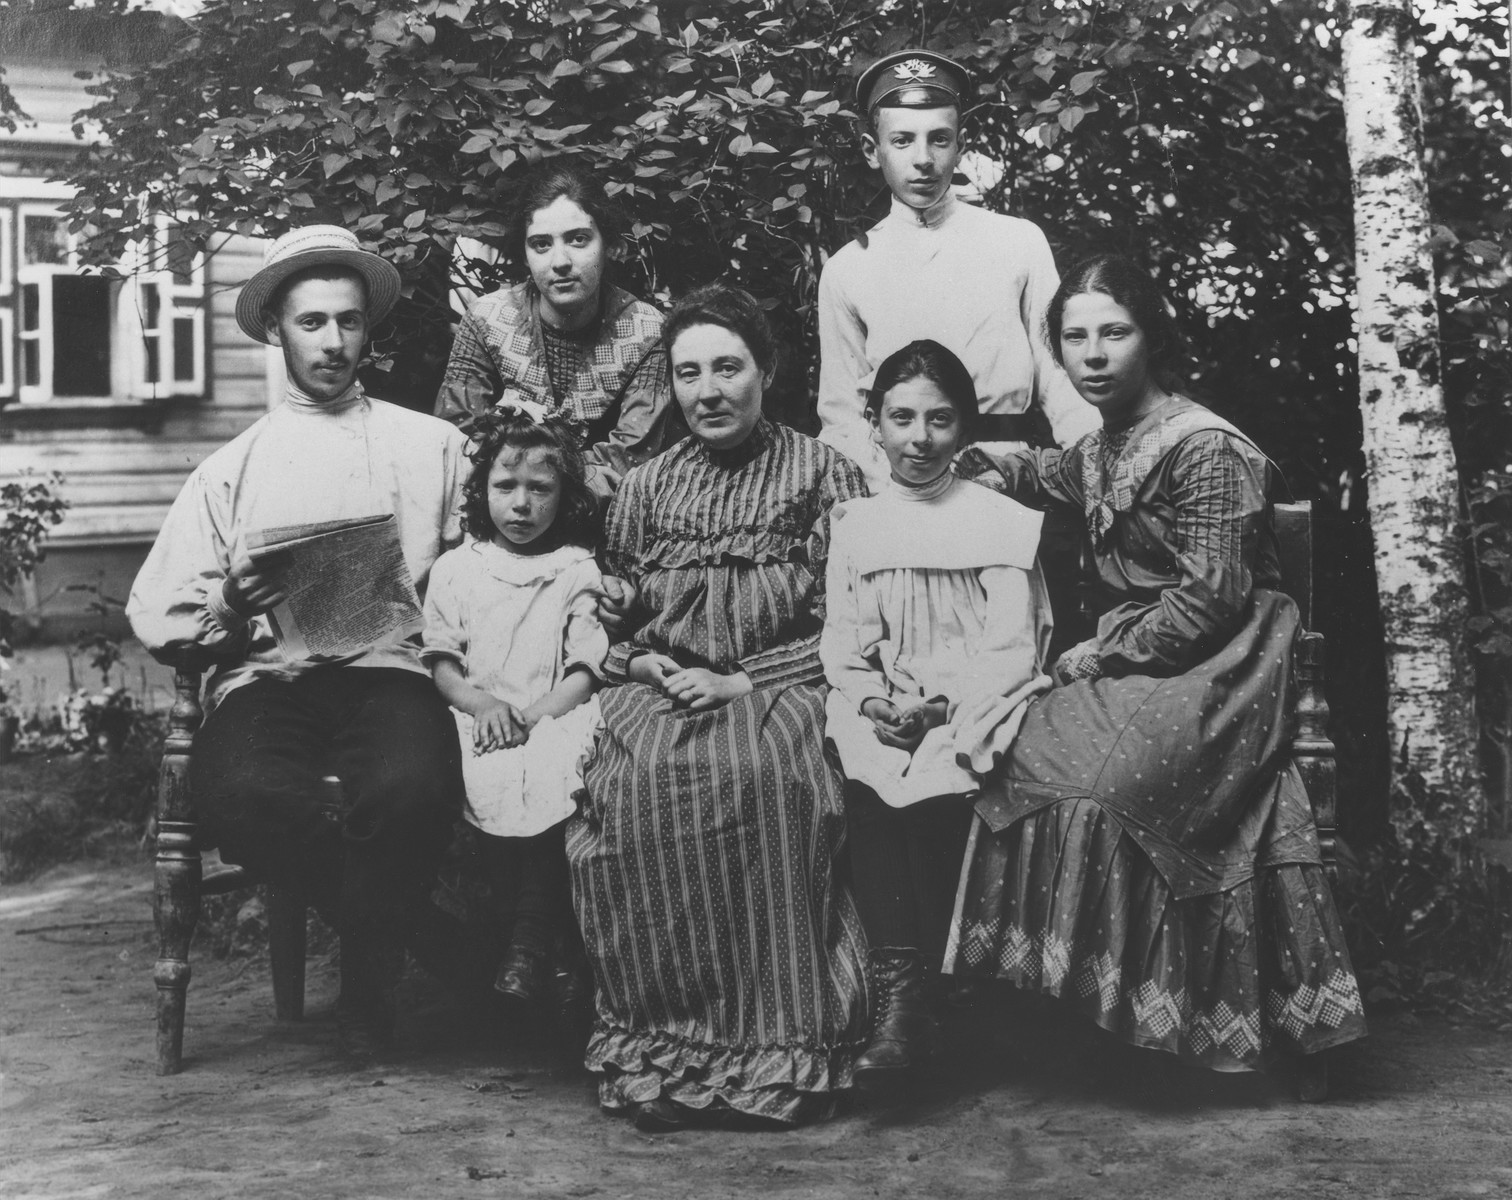 Portrait of the Mikolaevsky family at their dacha in the village of Strelna, a suburb of St. Petersburg.